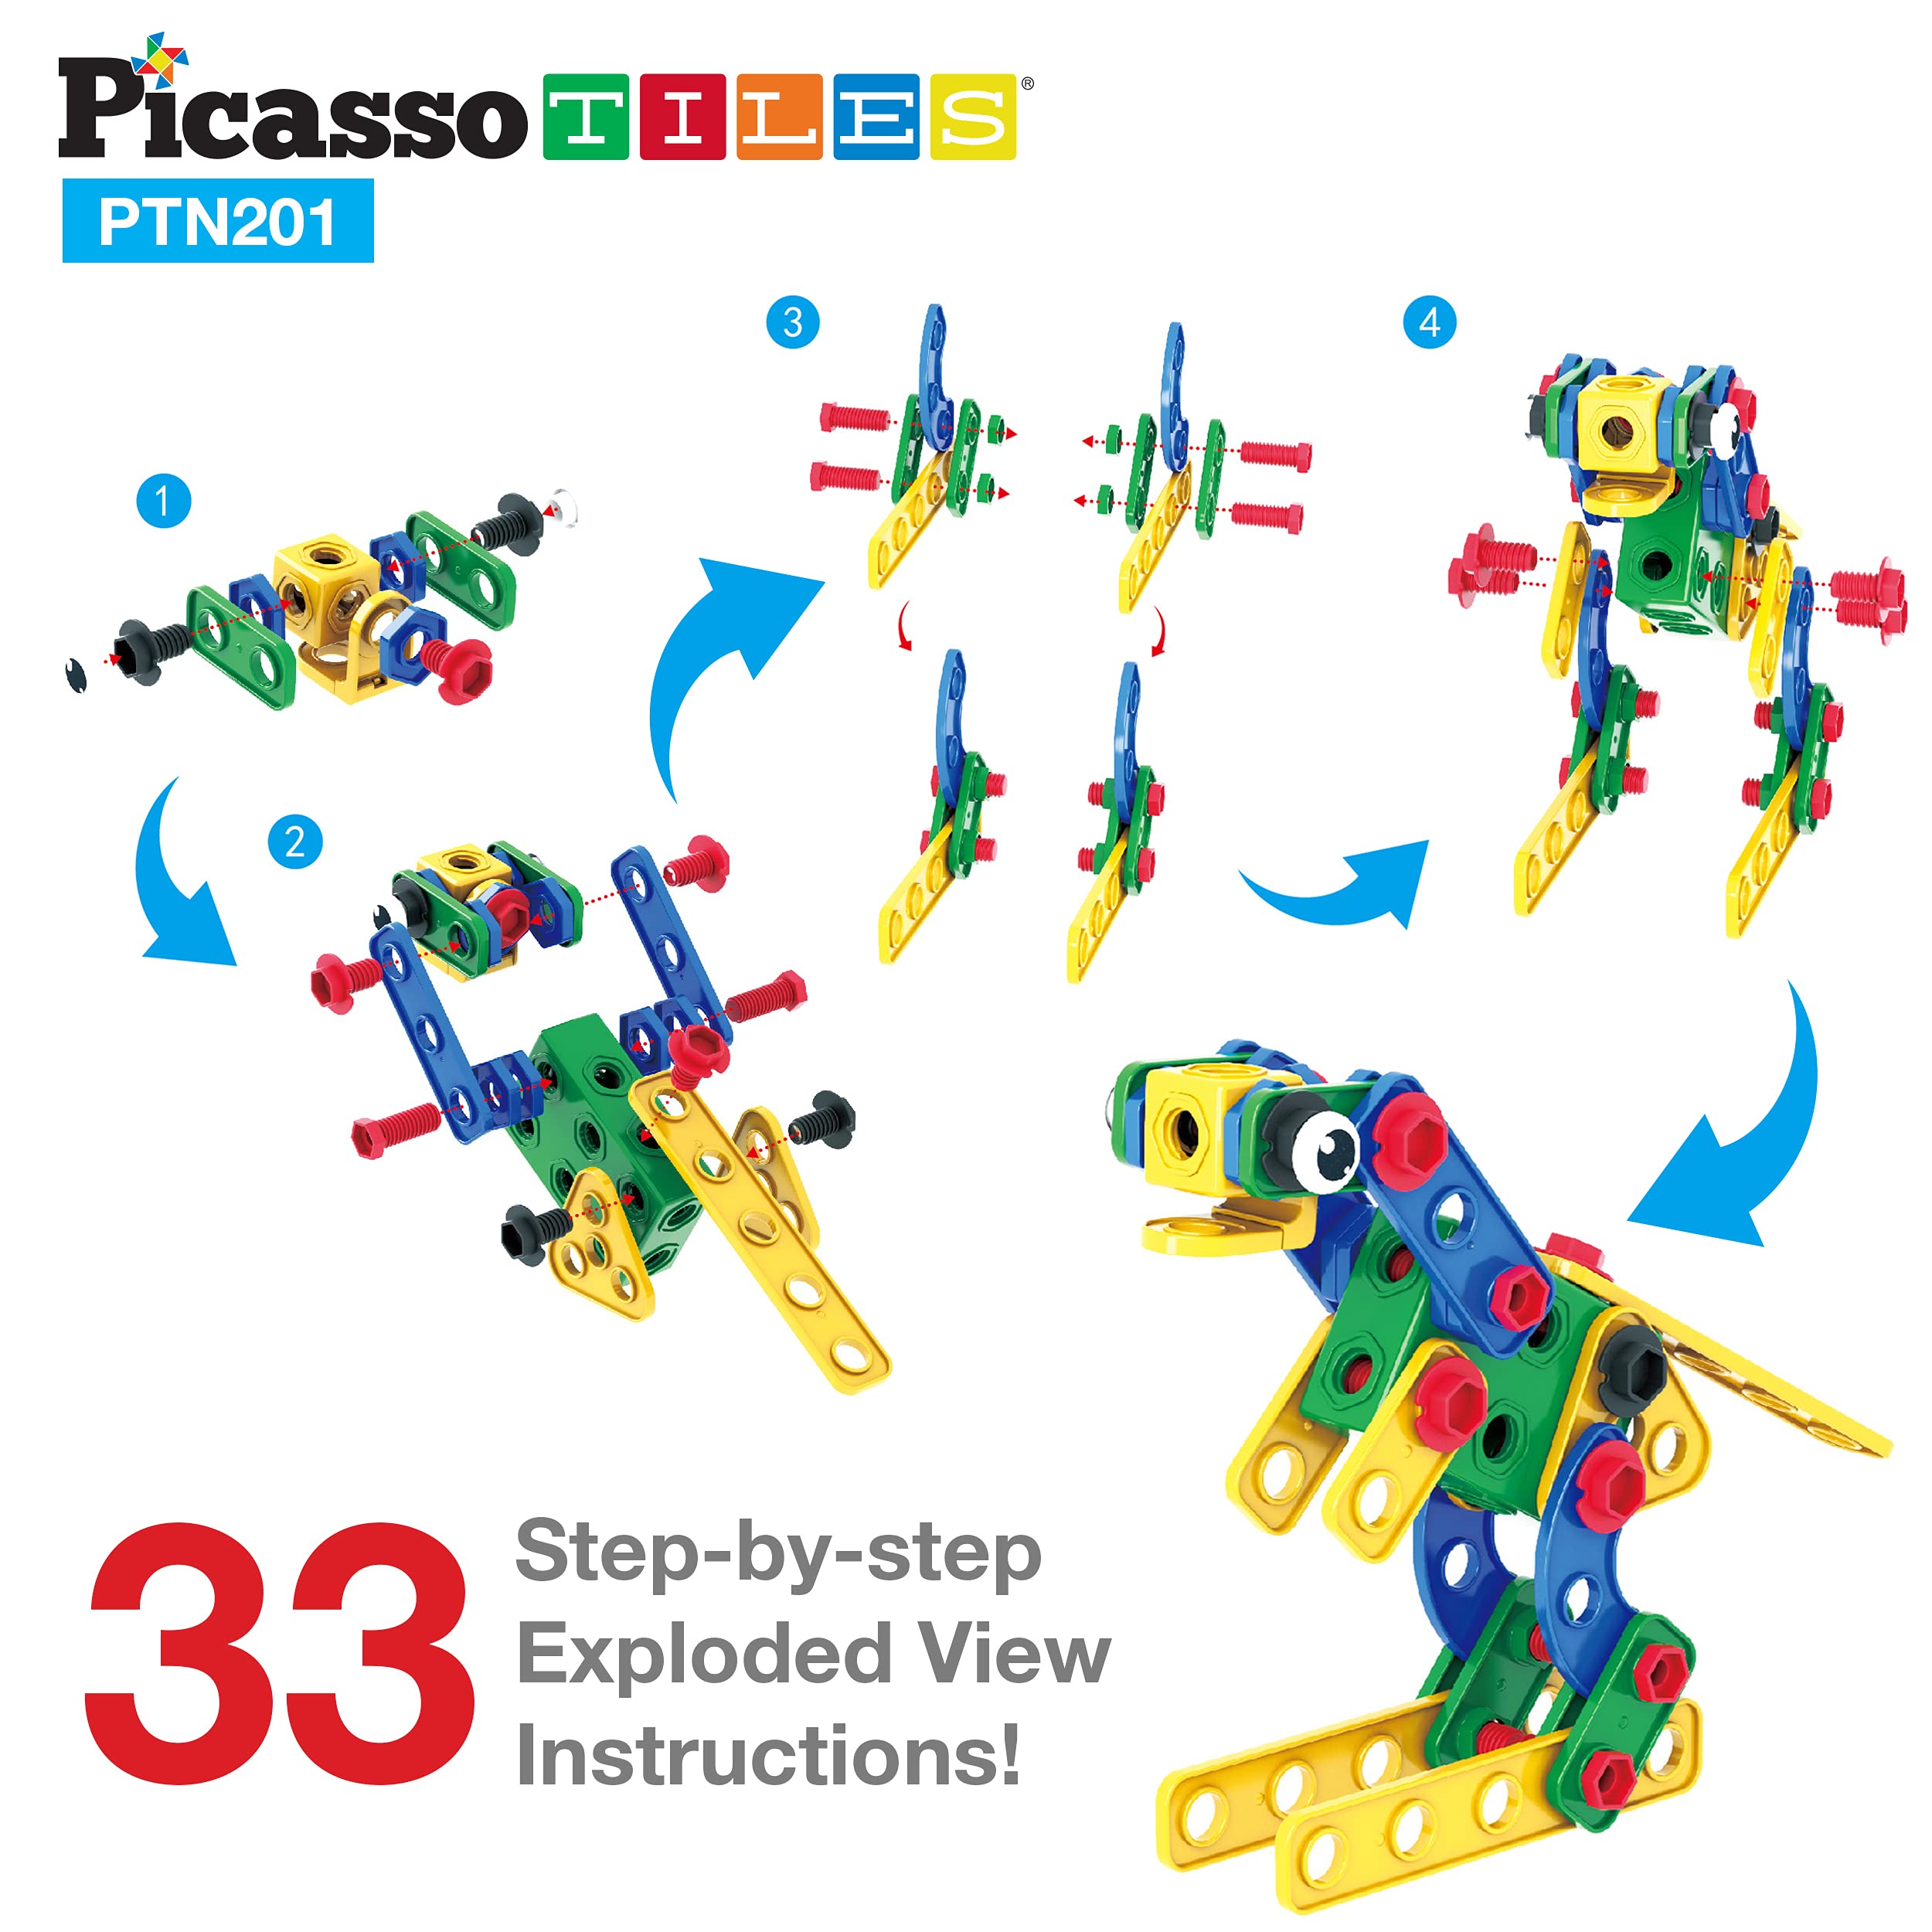 PicassoTiles 201 Piece Engineering Kit + 60 Piece Magnetic Mini Diamond Blocks, STEM Learning Toys Playset w/IdeaBook, Power Drill, Clickable Ratchet, Travel Size On-The-Go Magnet Construction Toy